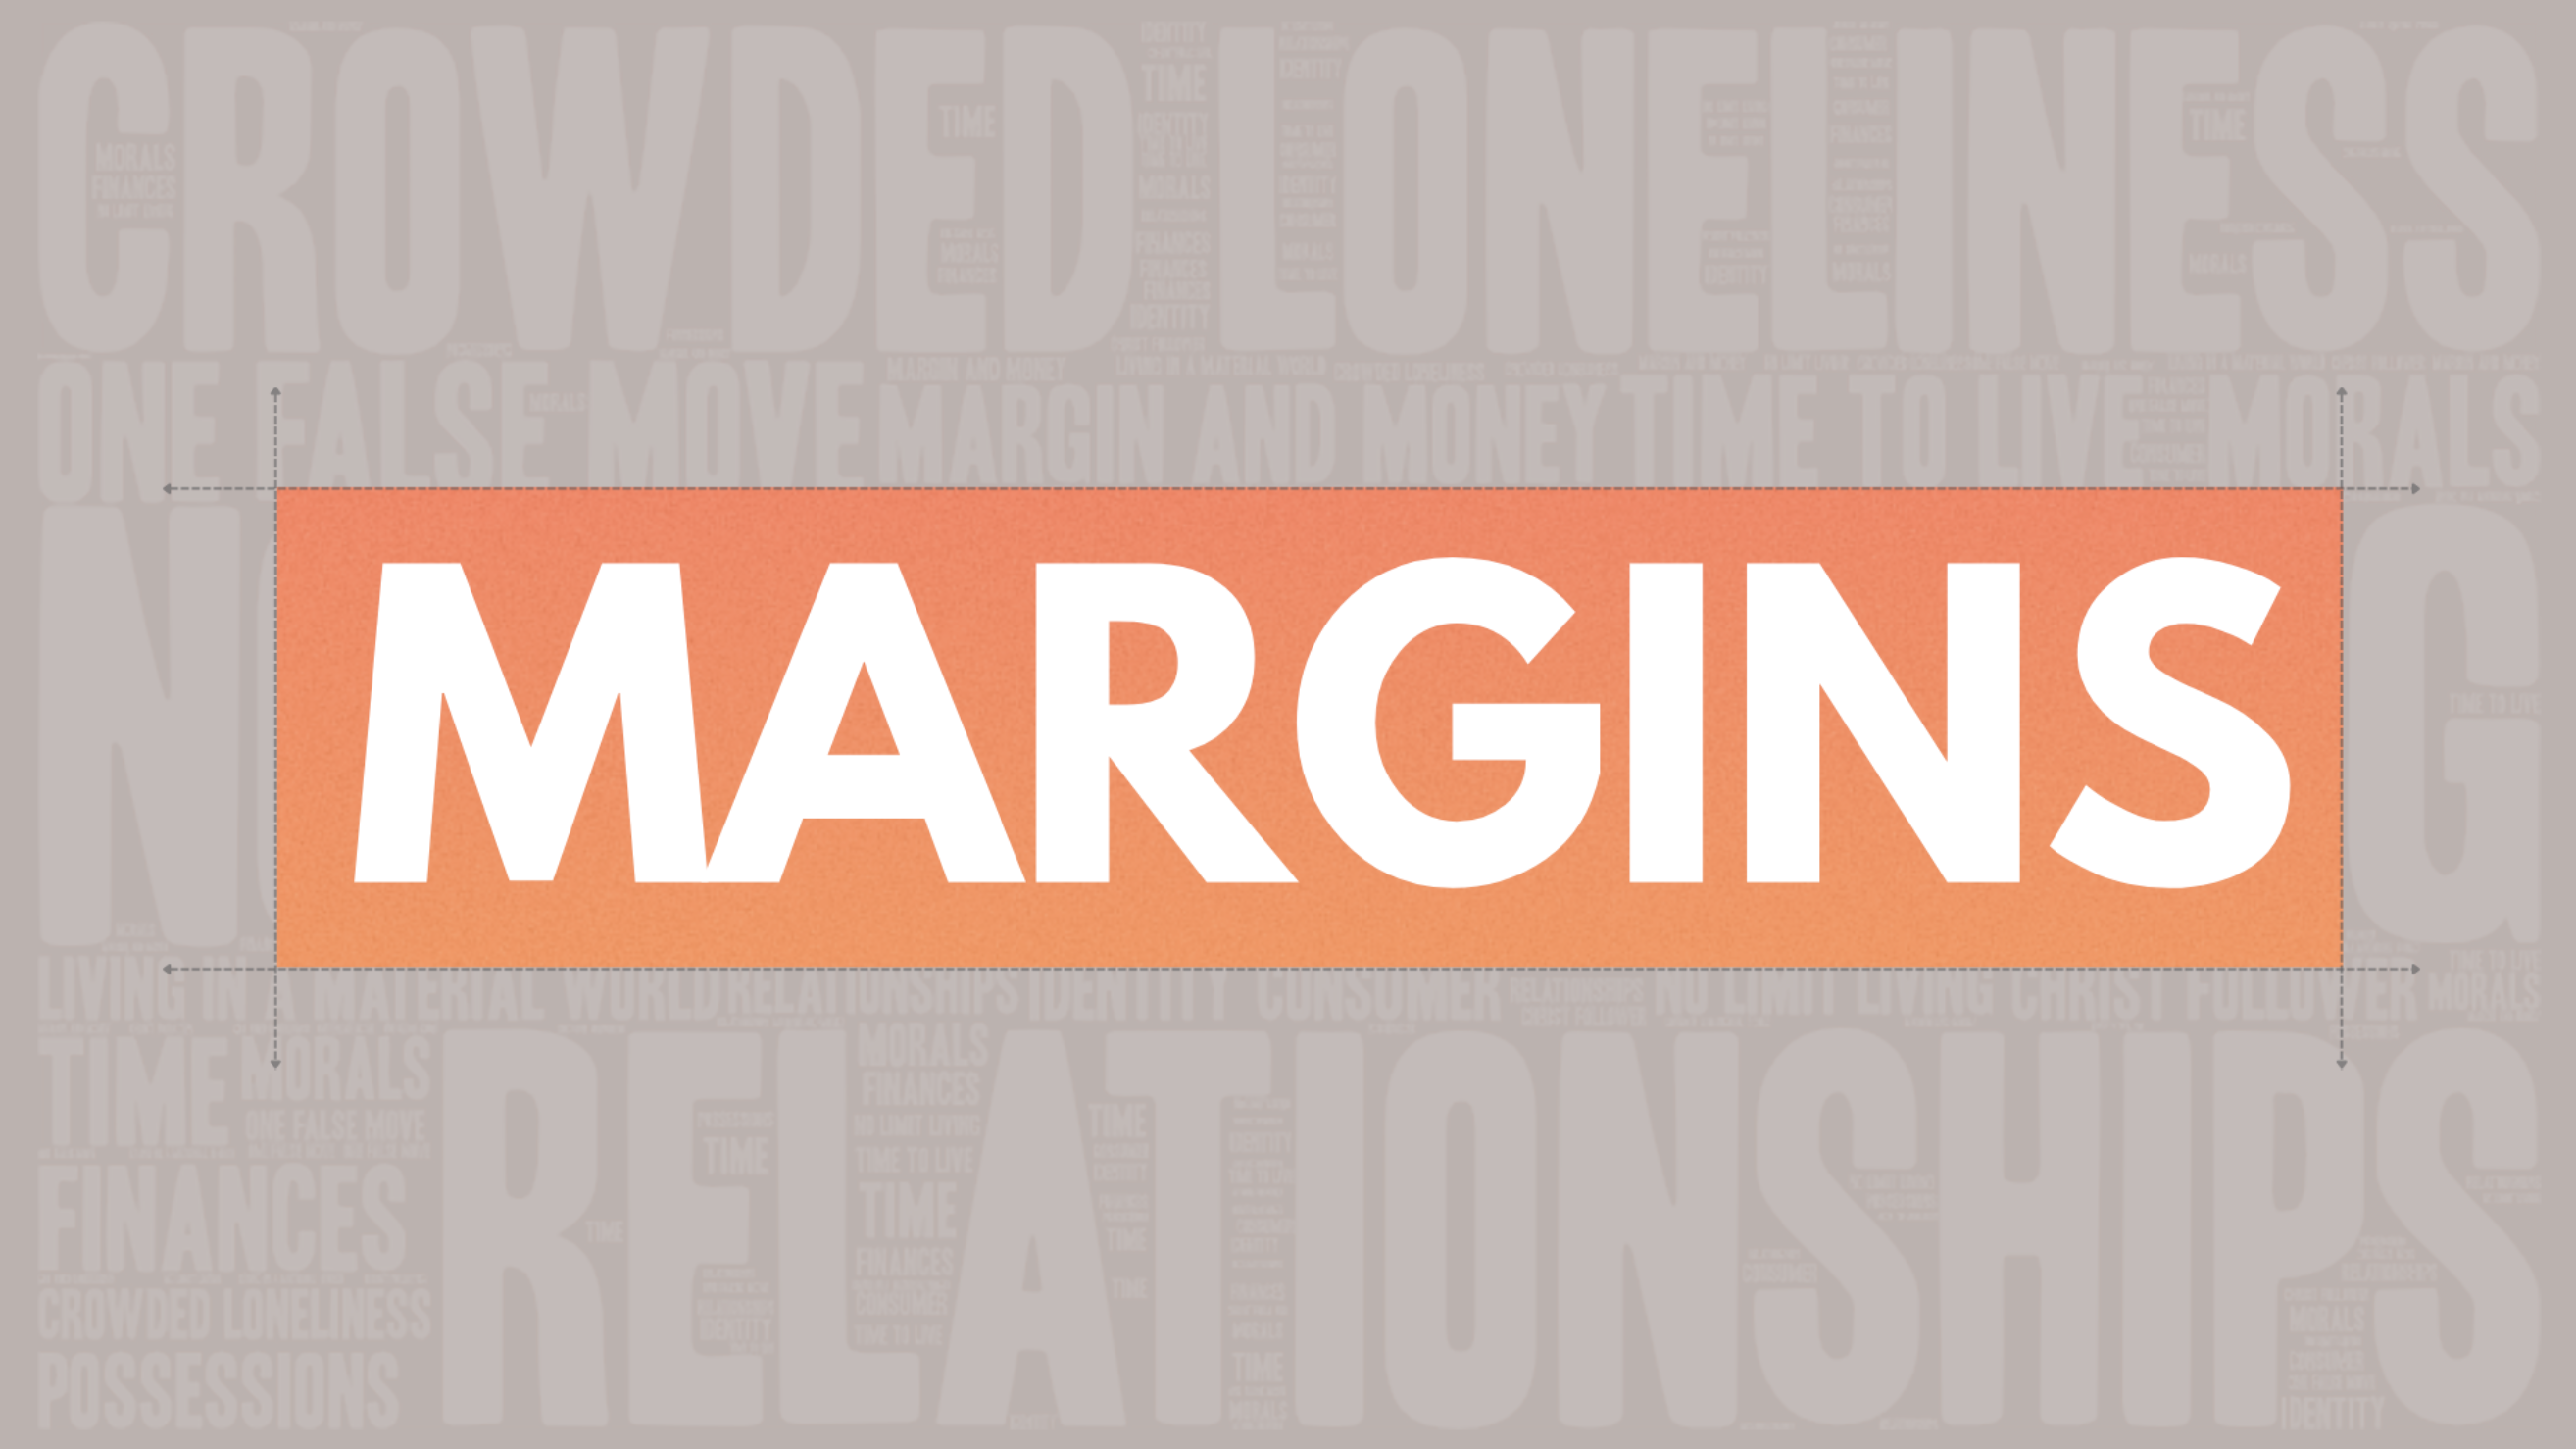 Margins – Make The Best Use Of Your One And Only Life